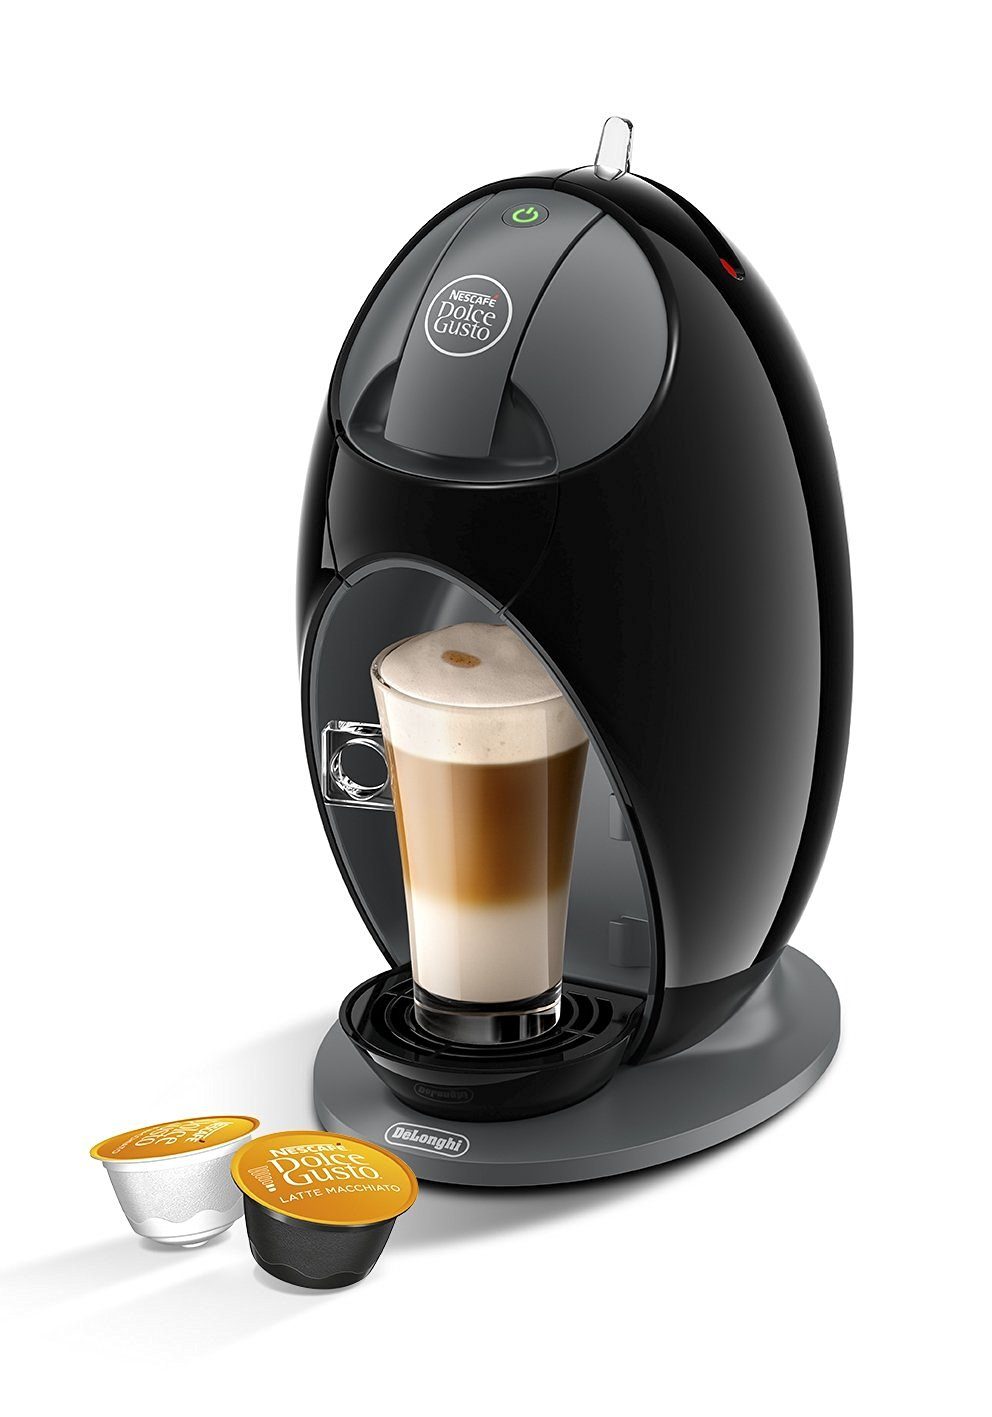 Nescafé Dolce Gusto Coffee Machine UK Review|The Perfect Grind